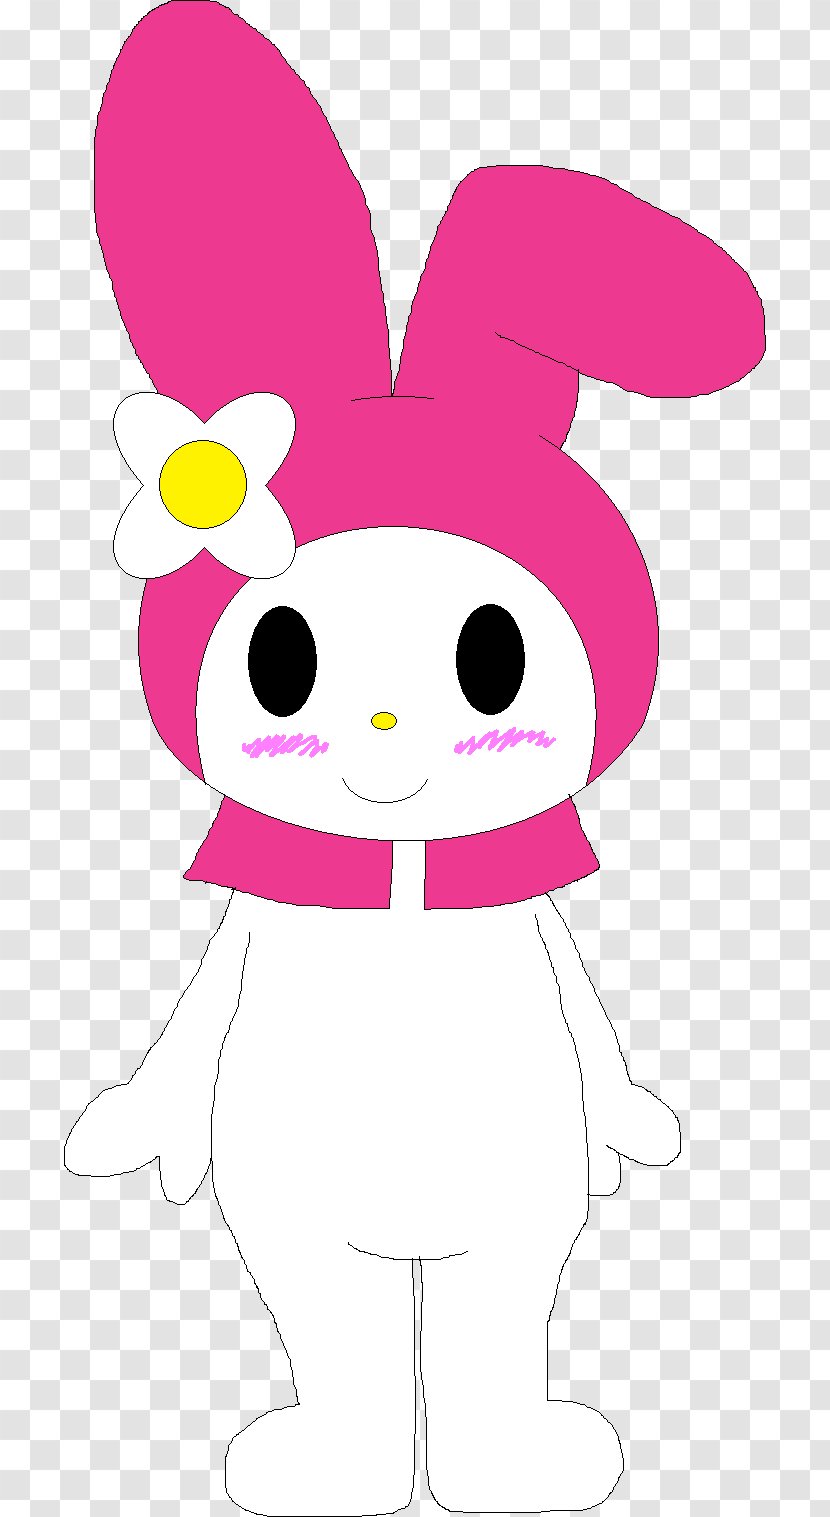 Hello Kitty My Melody Fan Art - Silhouette Transparent PNG